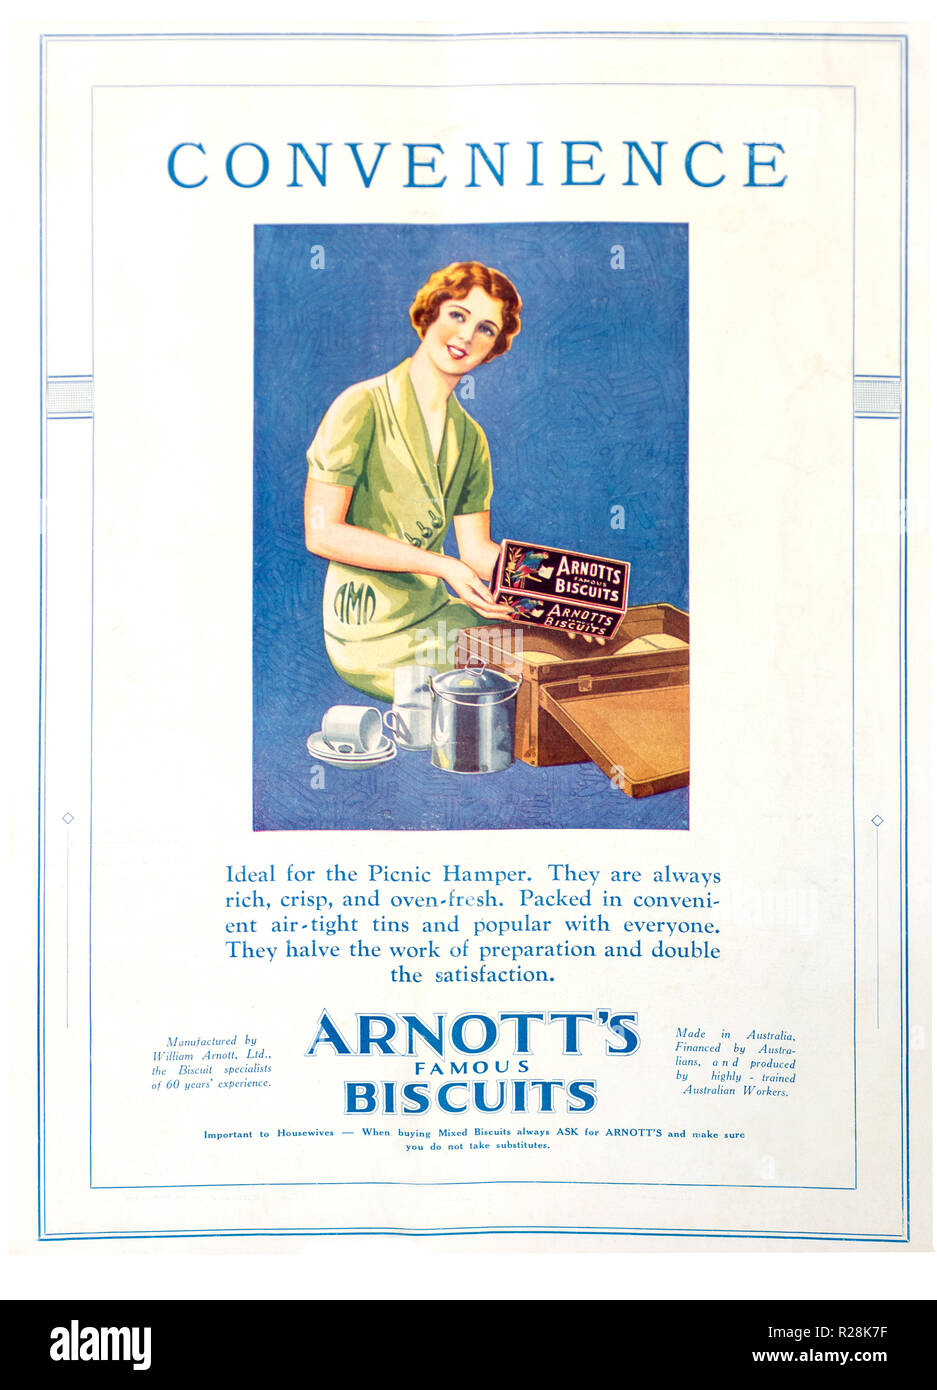 Arnott's Famous Biscuits  colour advertisement in The Sydney Mail newspaper. 19032 Stock Photo